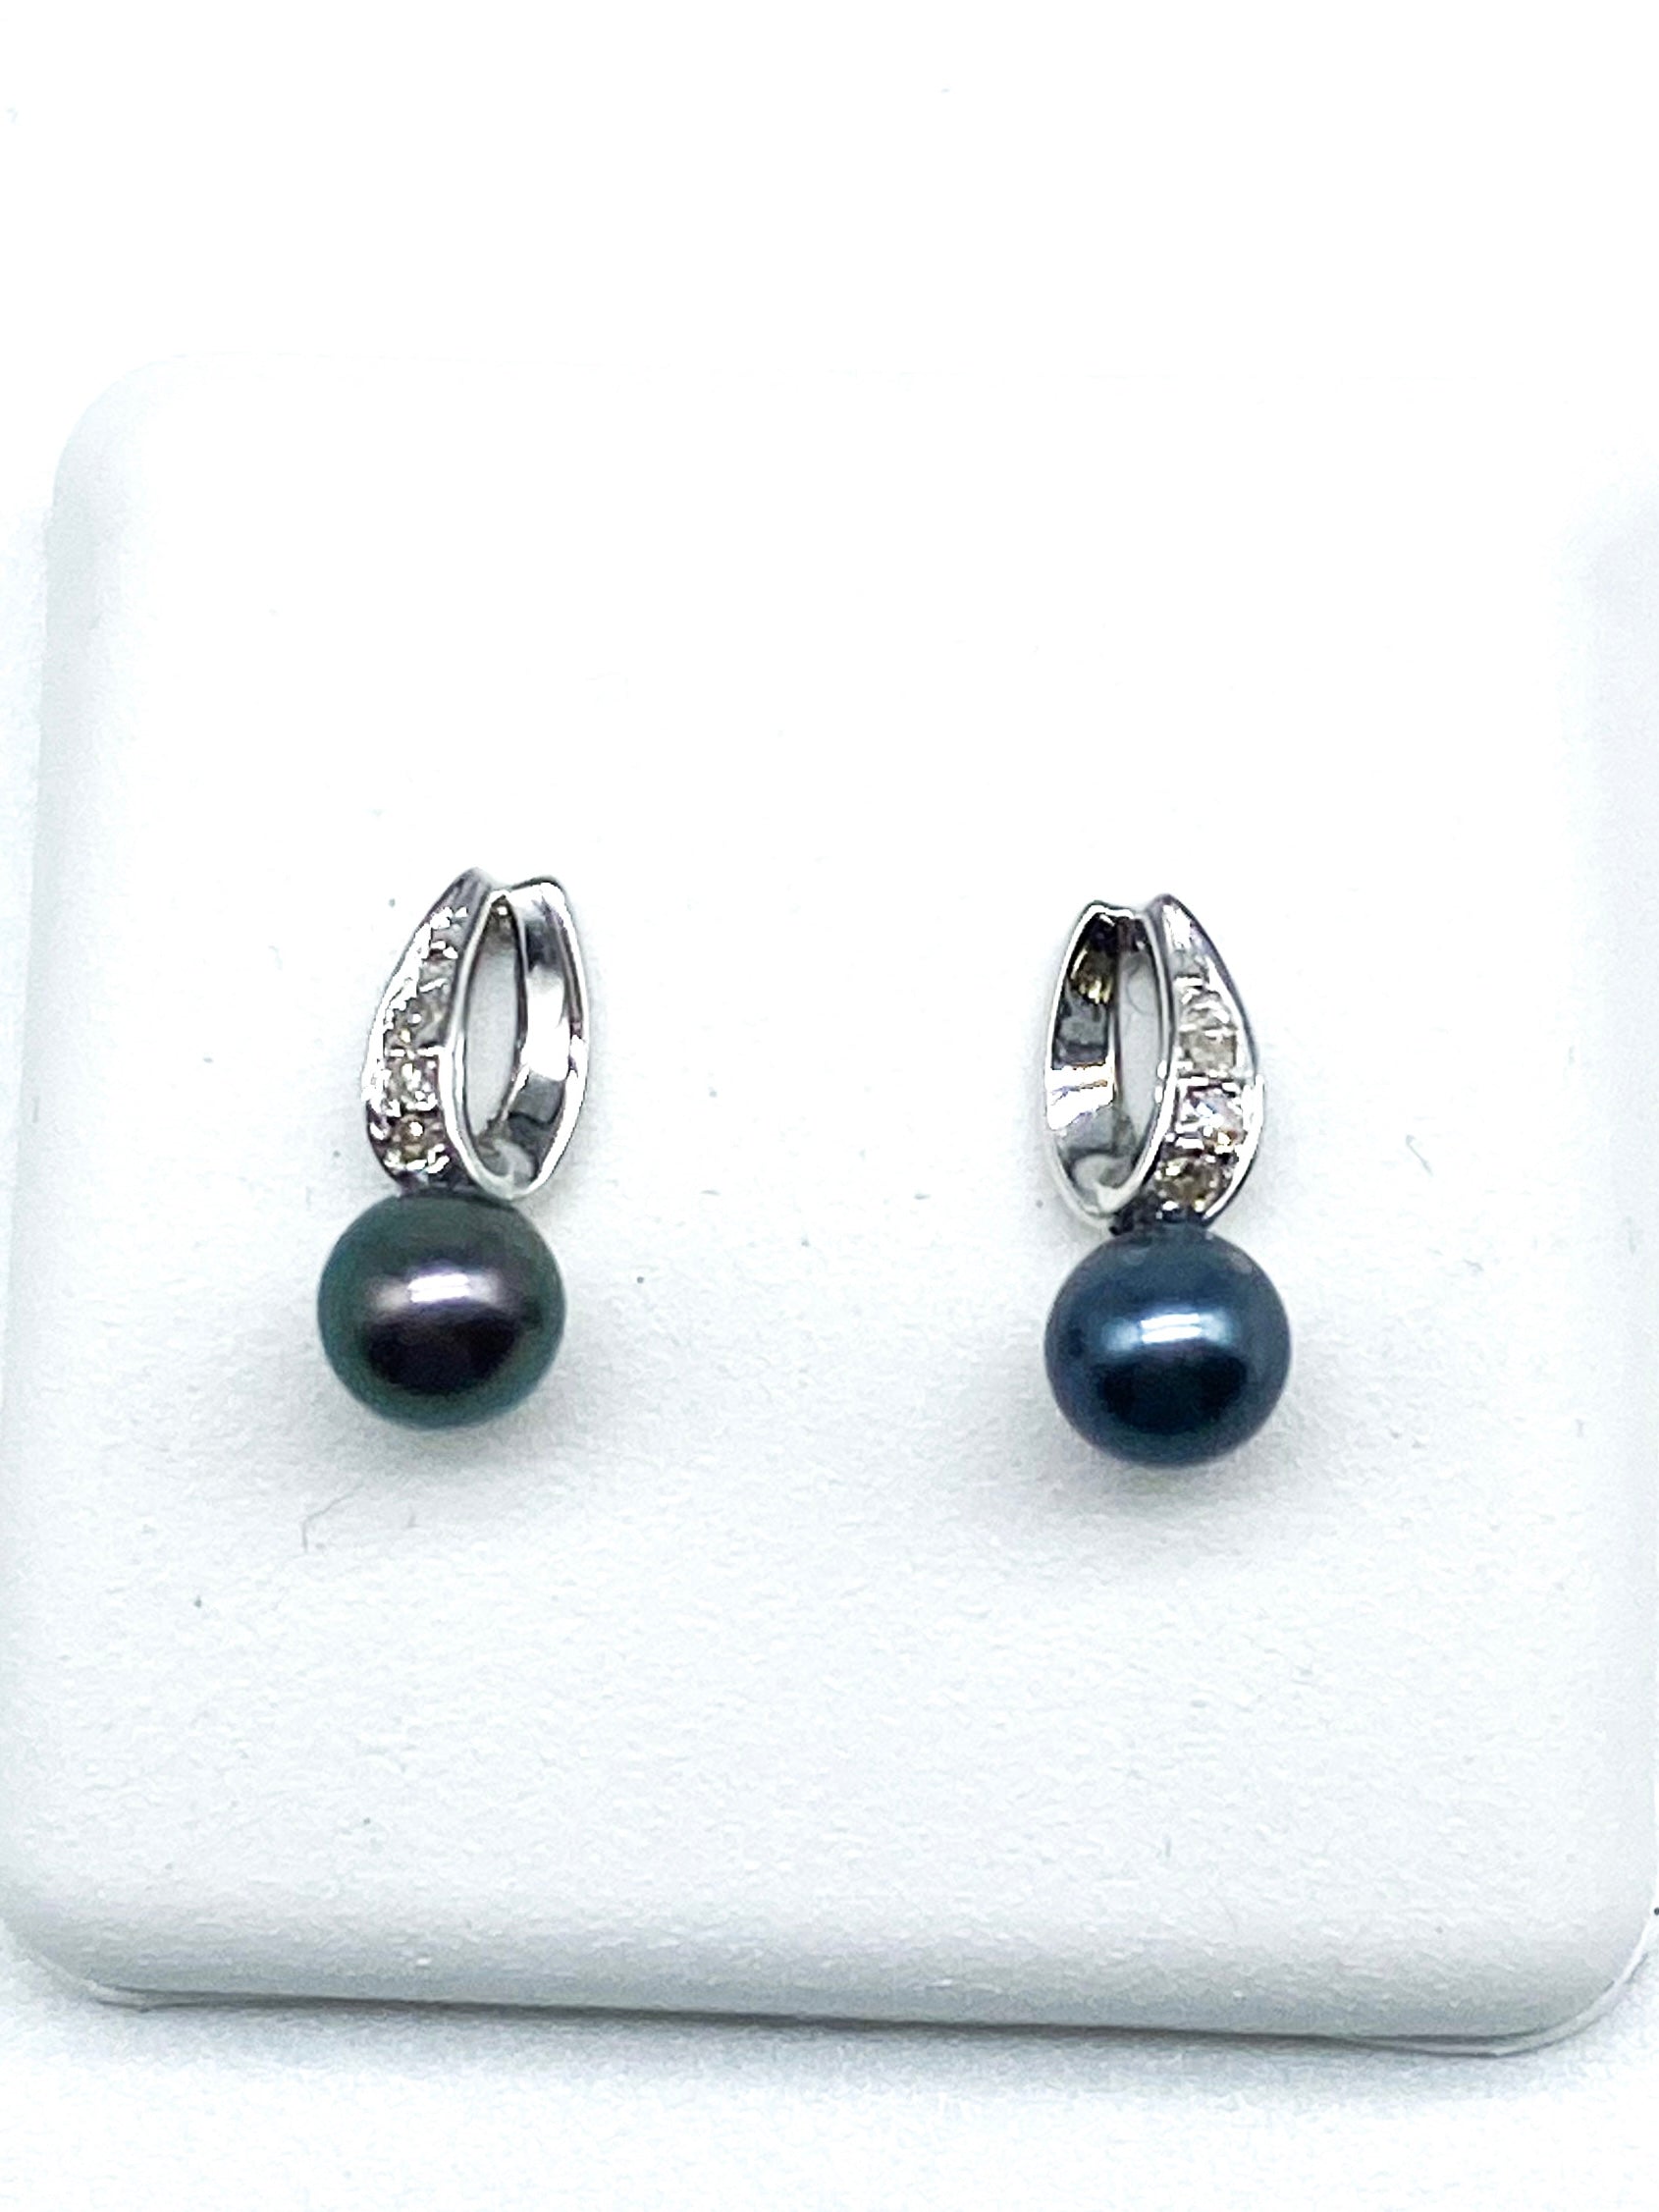 Black Cultured Pearls and Round Brilliant Cut Diamond Earrings